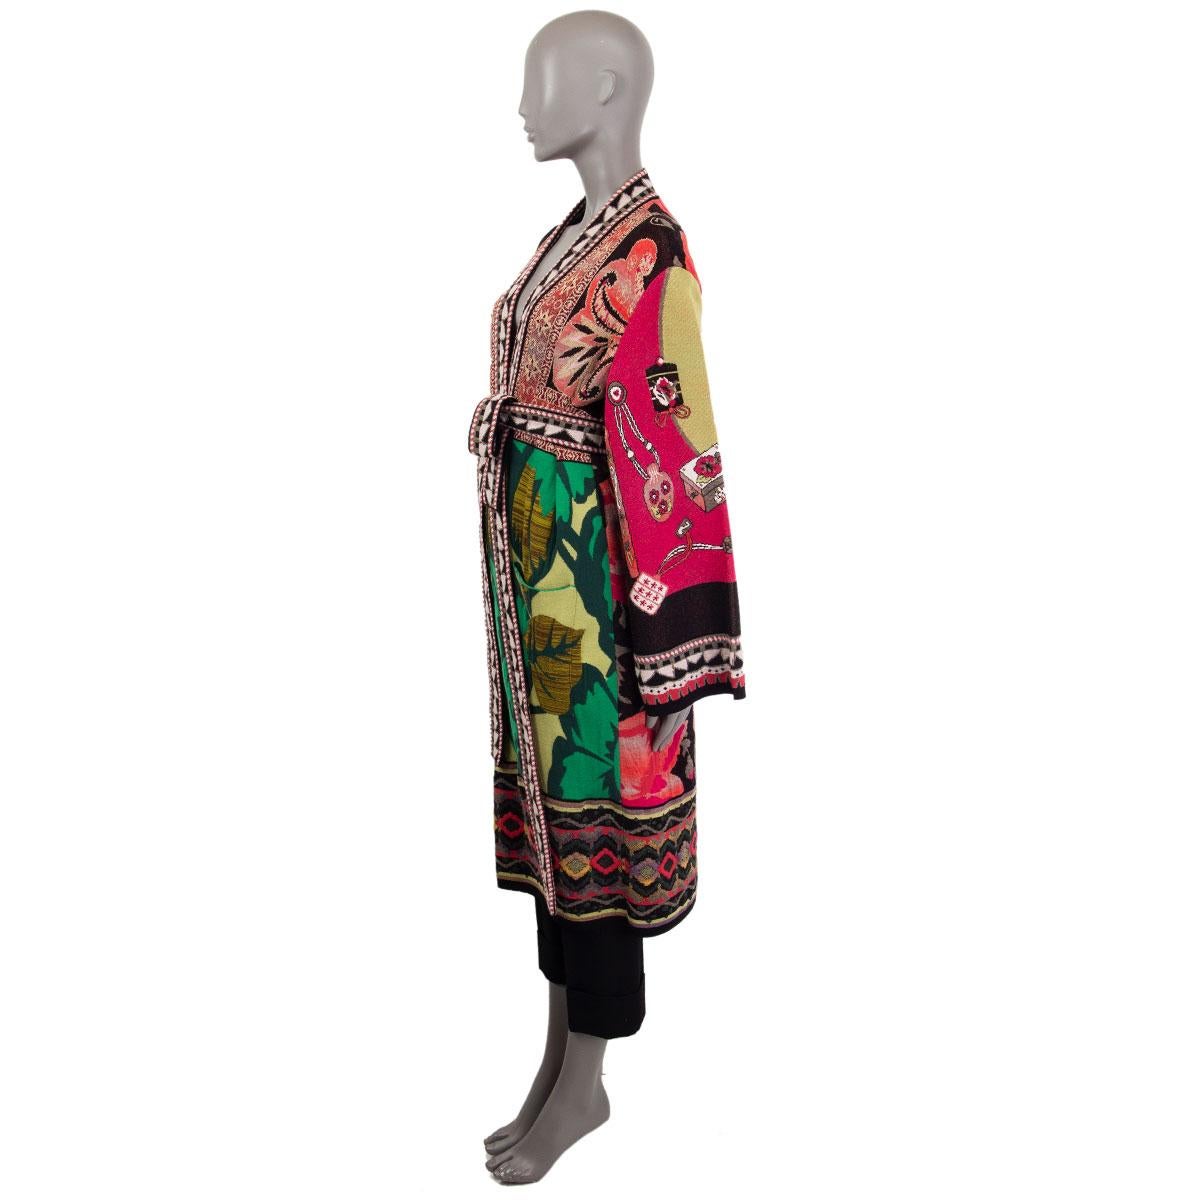 Etro floral print belted knit cardigan in multi-color wool (40%), viscose (33%), polyamide (8%), acrylic (6%), polyester (6%), cotton (6%), metallised fibre (1%) with two front deep slip pockets. Ties on the front with a matching belt. Unlined. Has